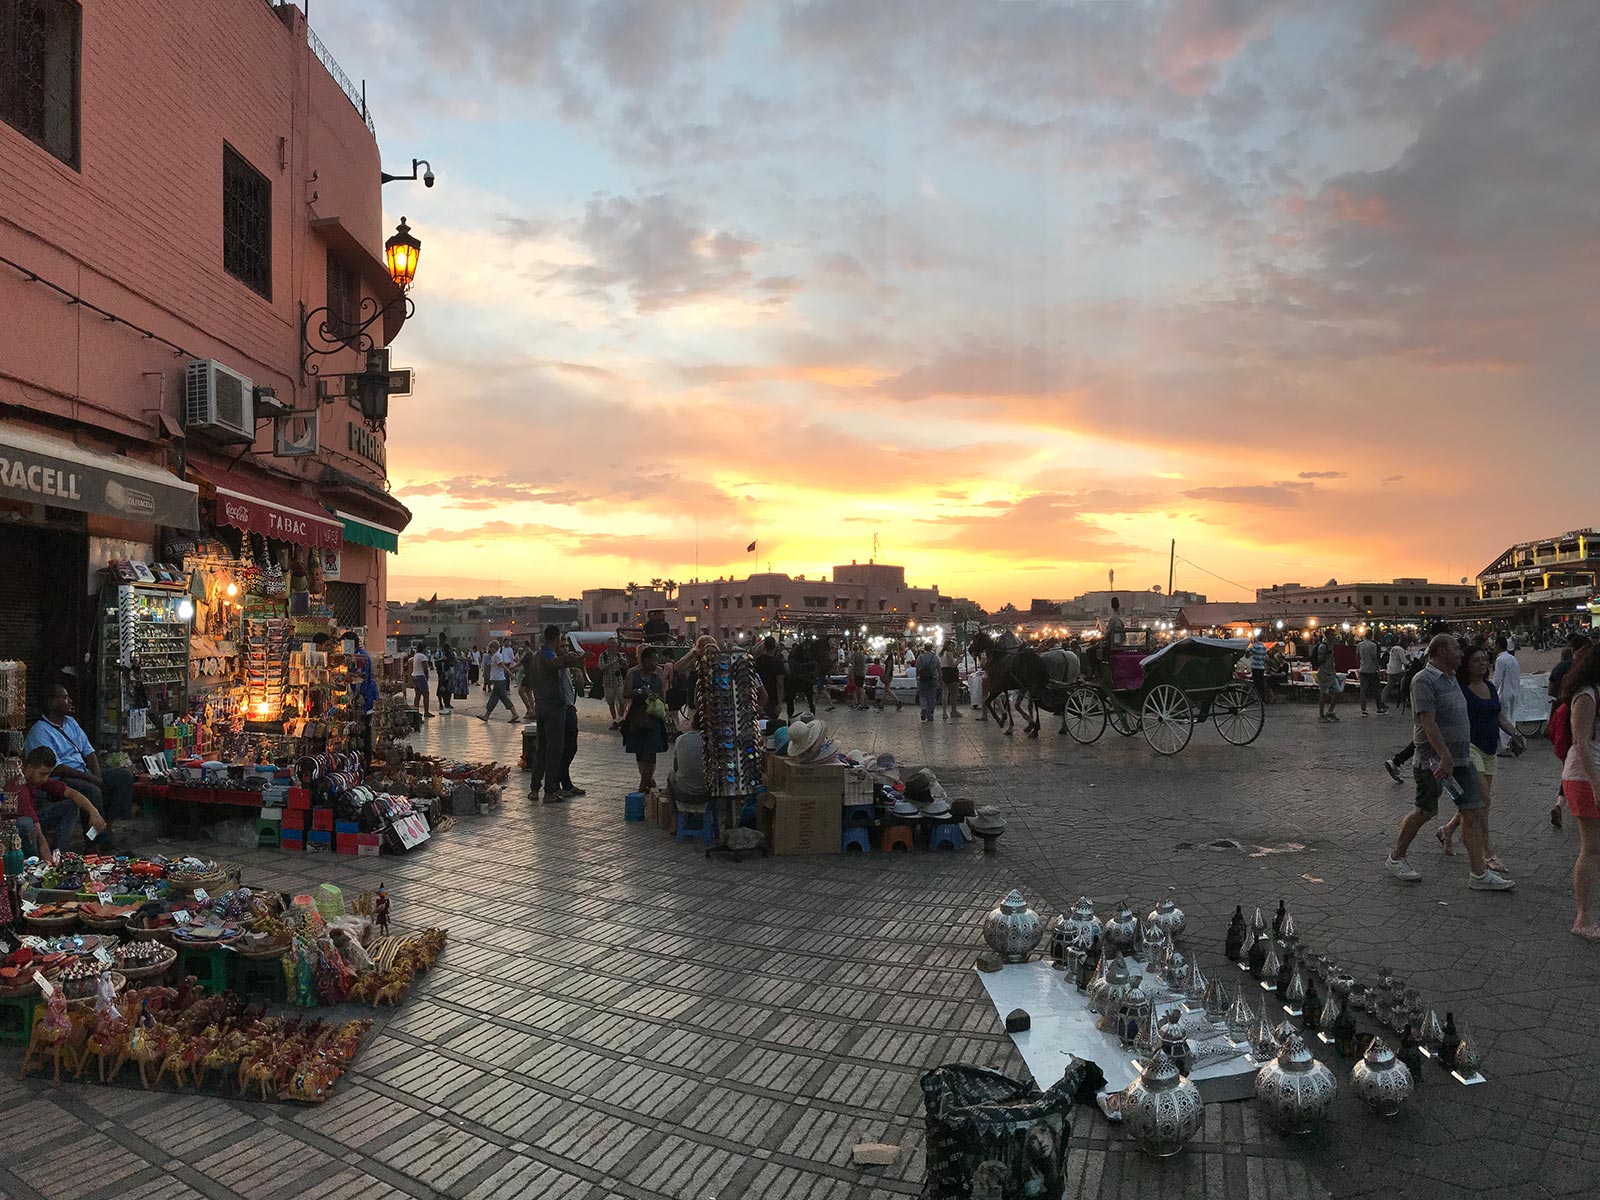 Market at sunset in Marrakesh, Morocco. Being attacked by a man with a snake